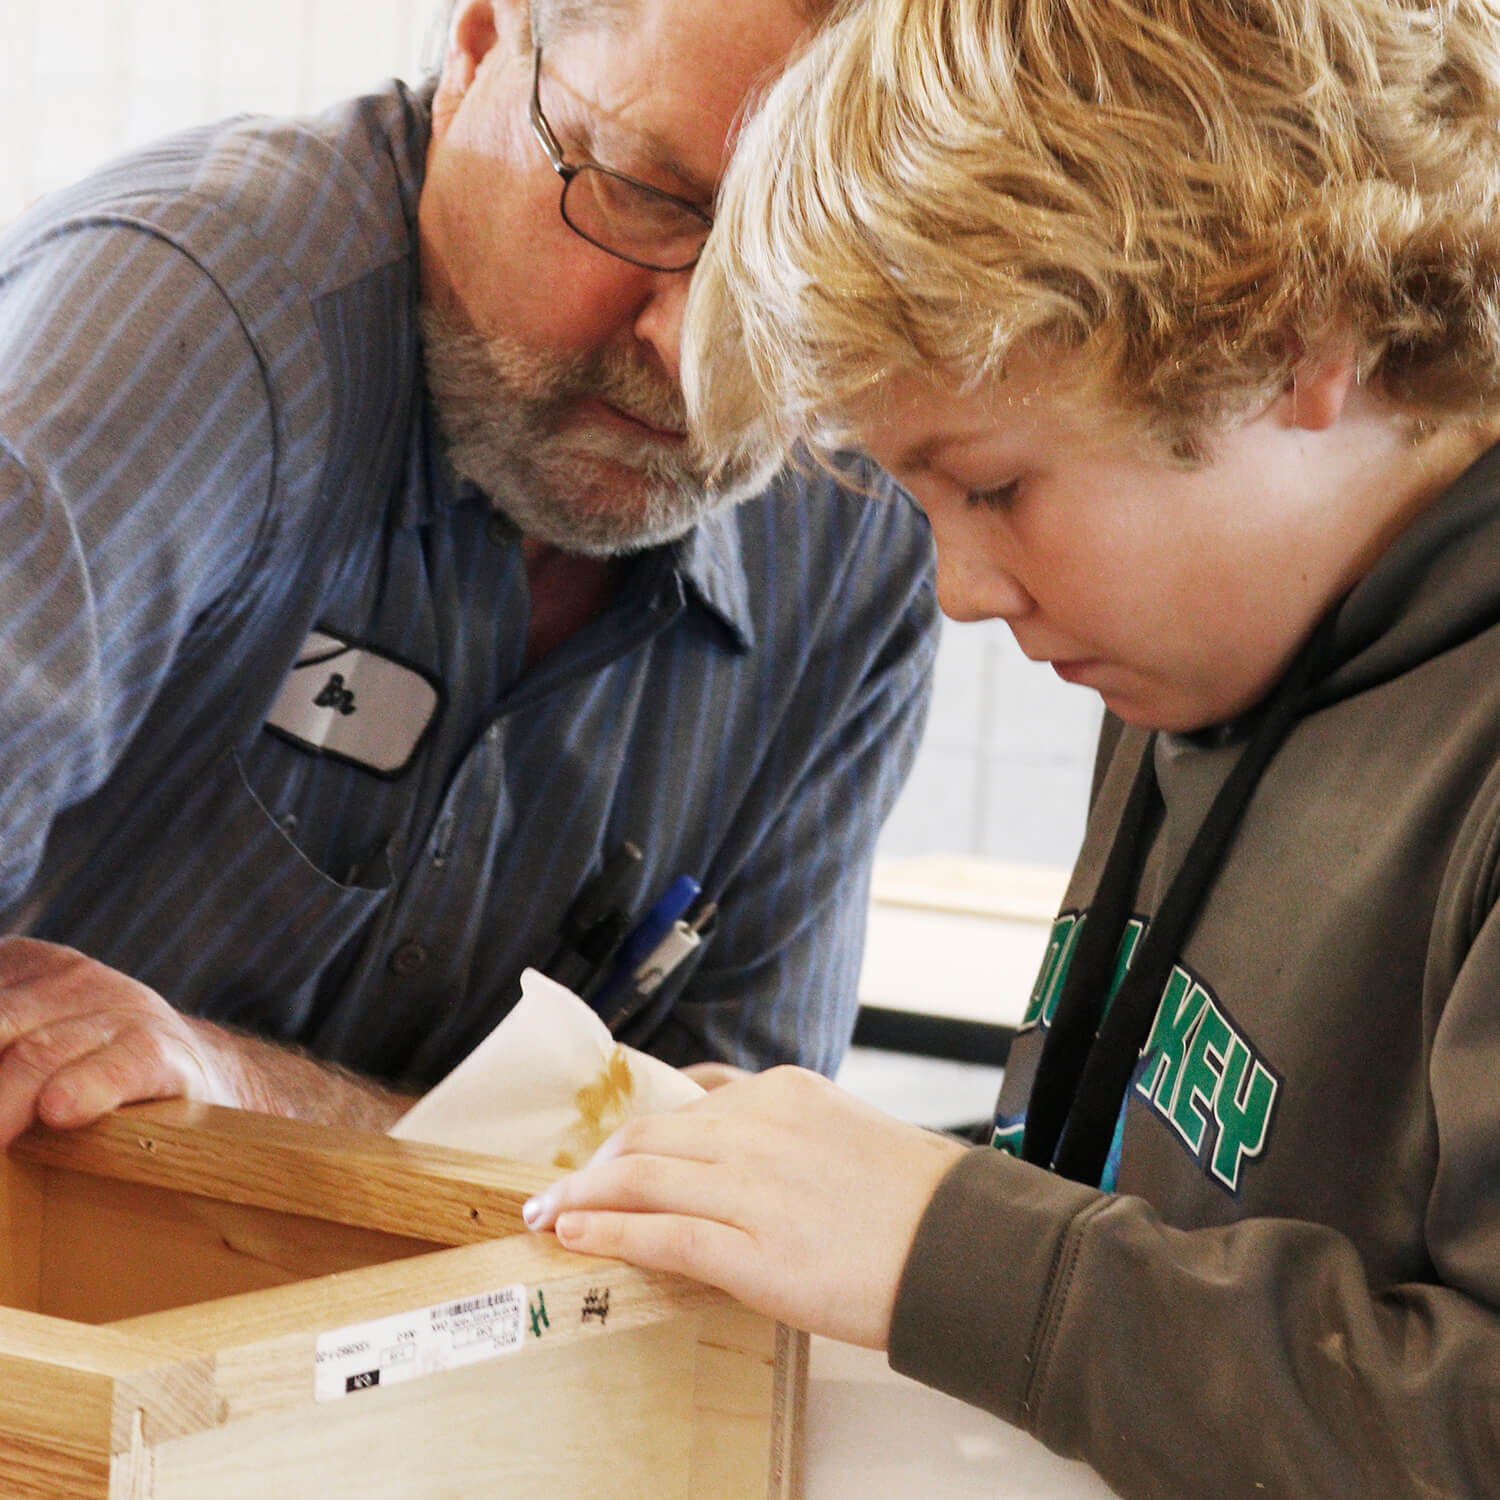 A student and his father building a cabinet together.